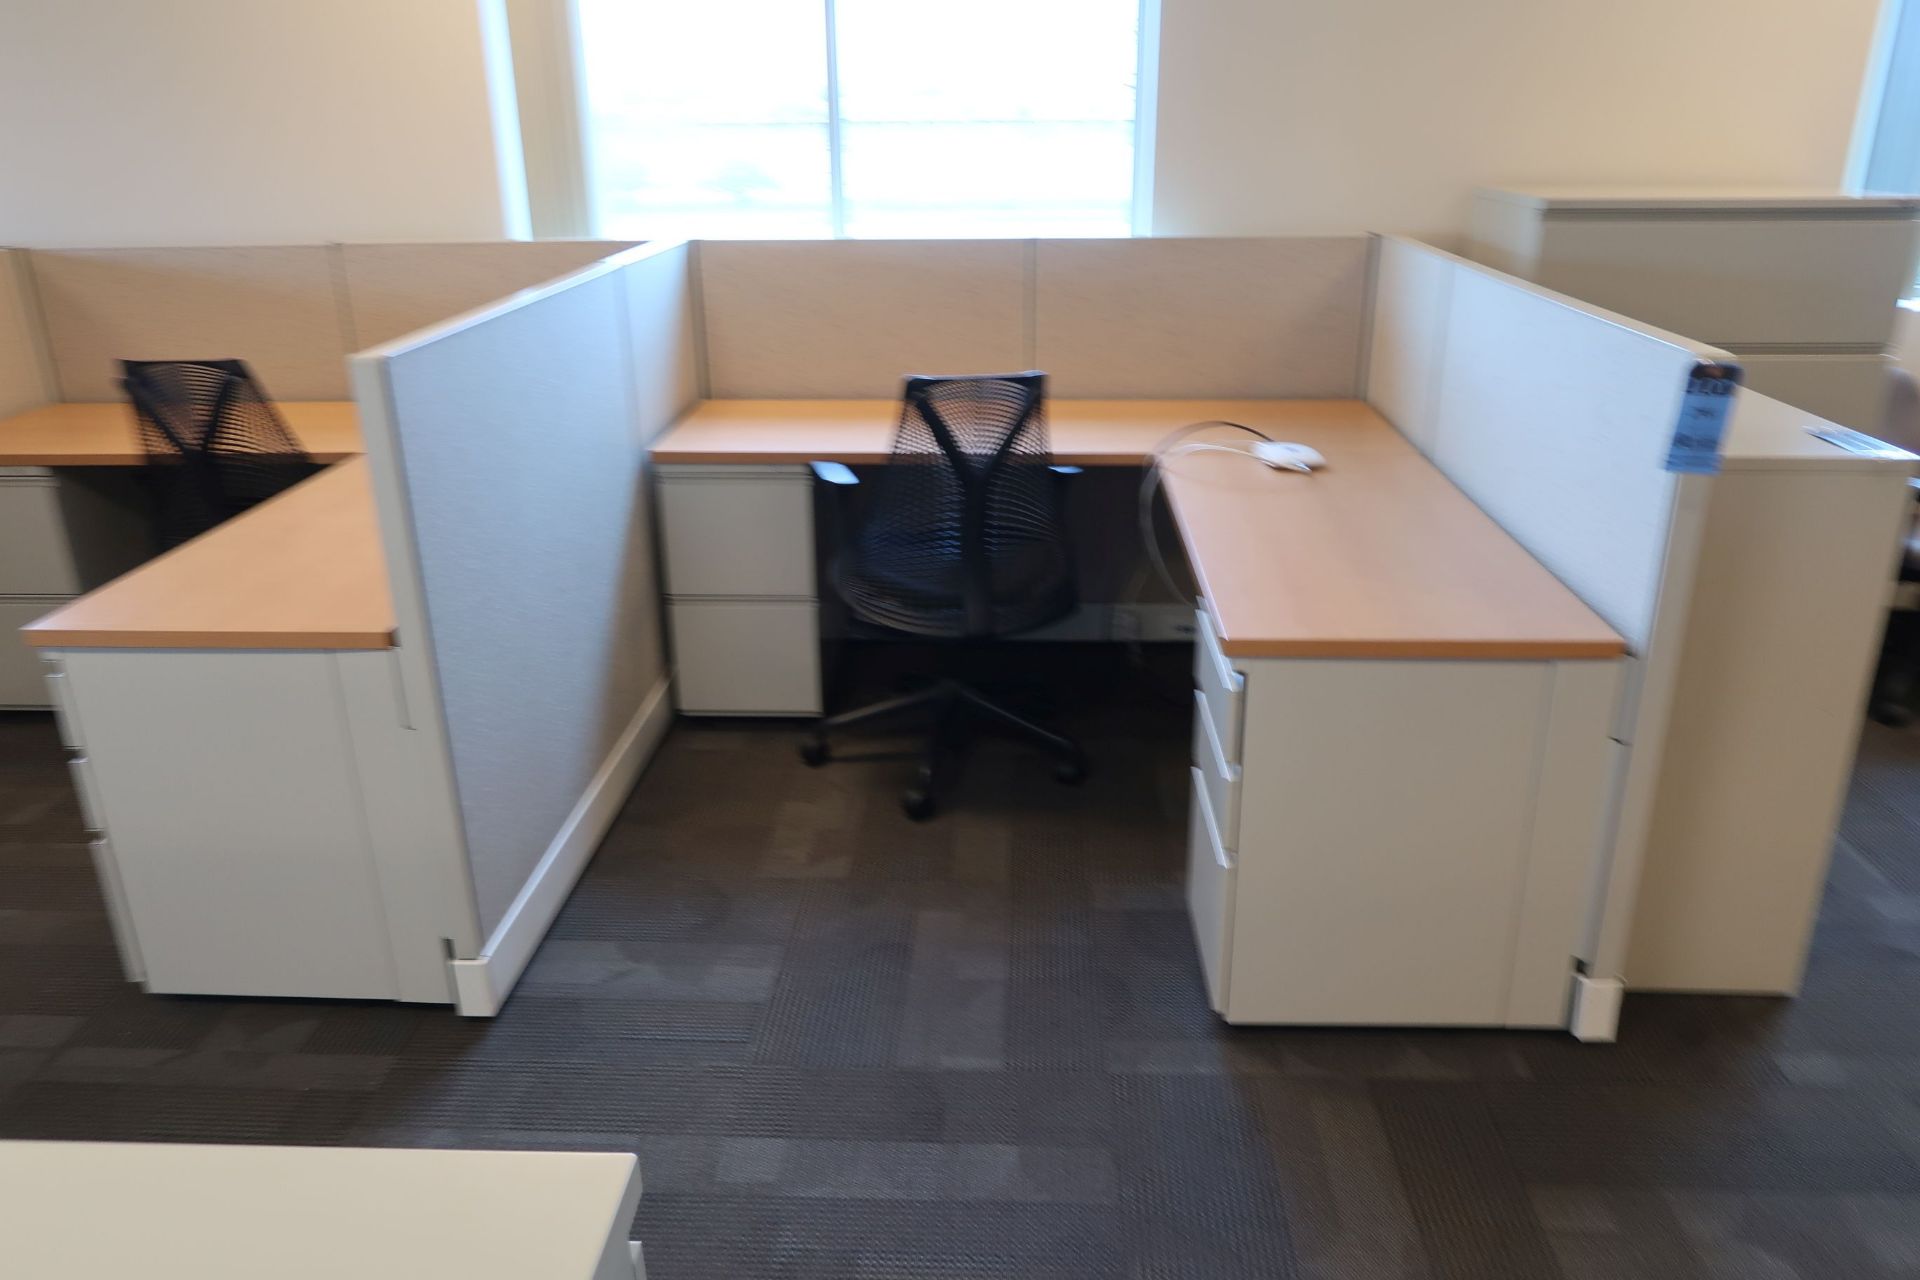 (LOT) 4-PERSON HERMAN MILLER CUBICLE SET 47" HIGH WALLS WITH CHAIRS - Image 2 of 5